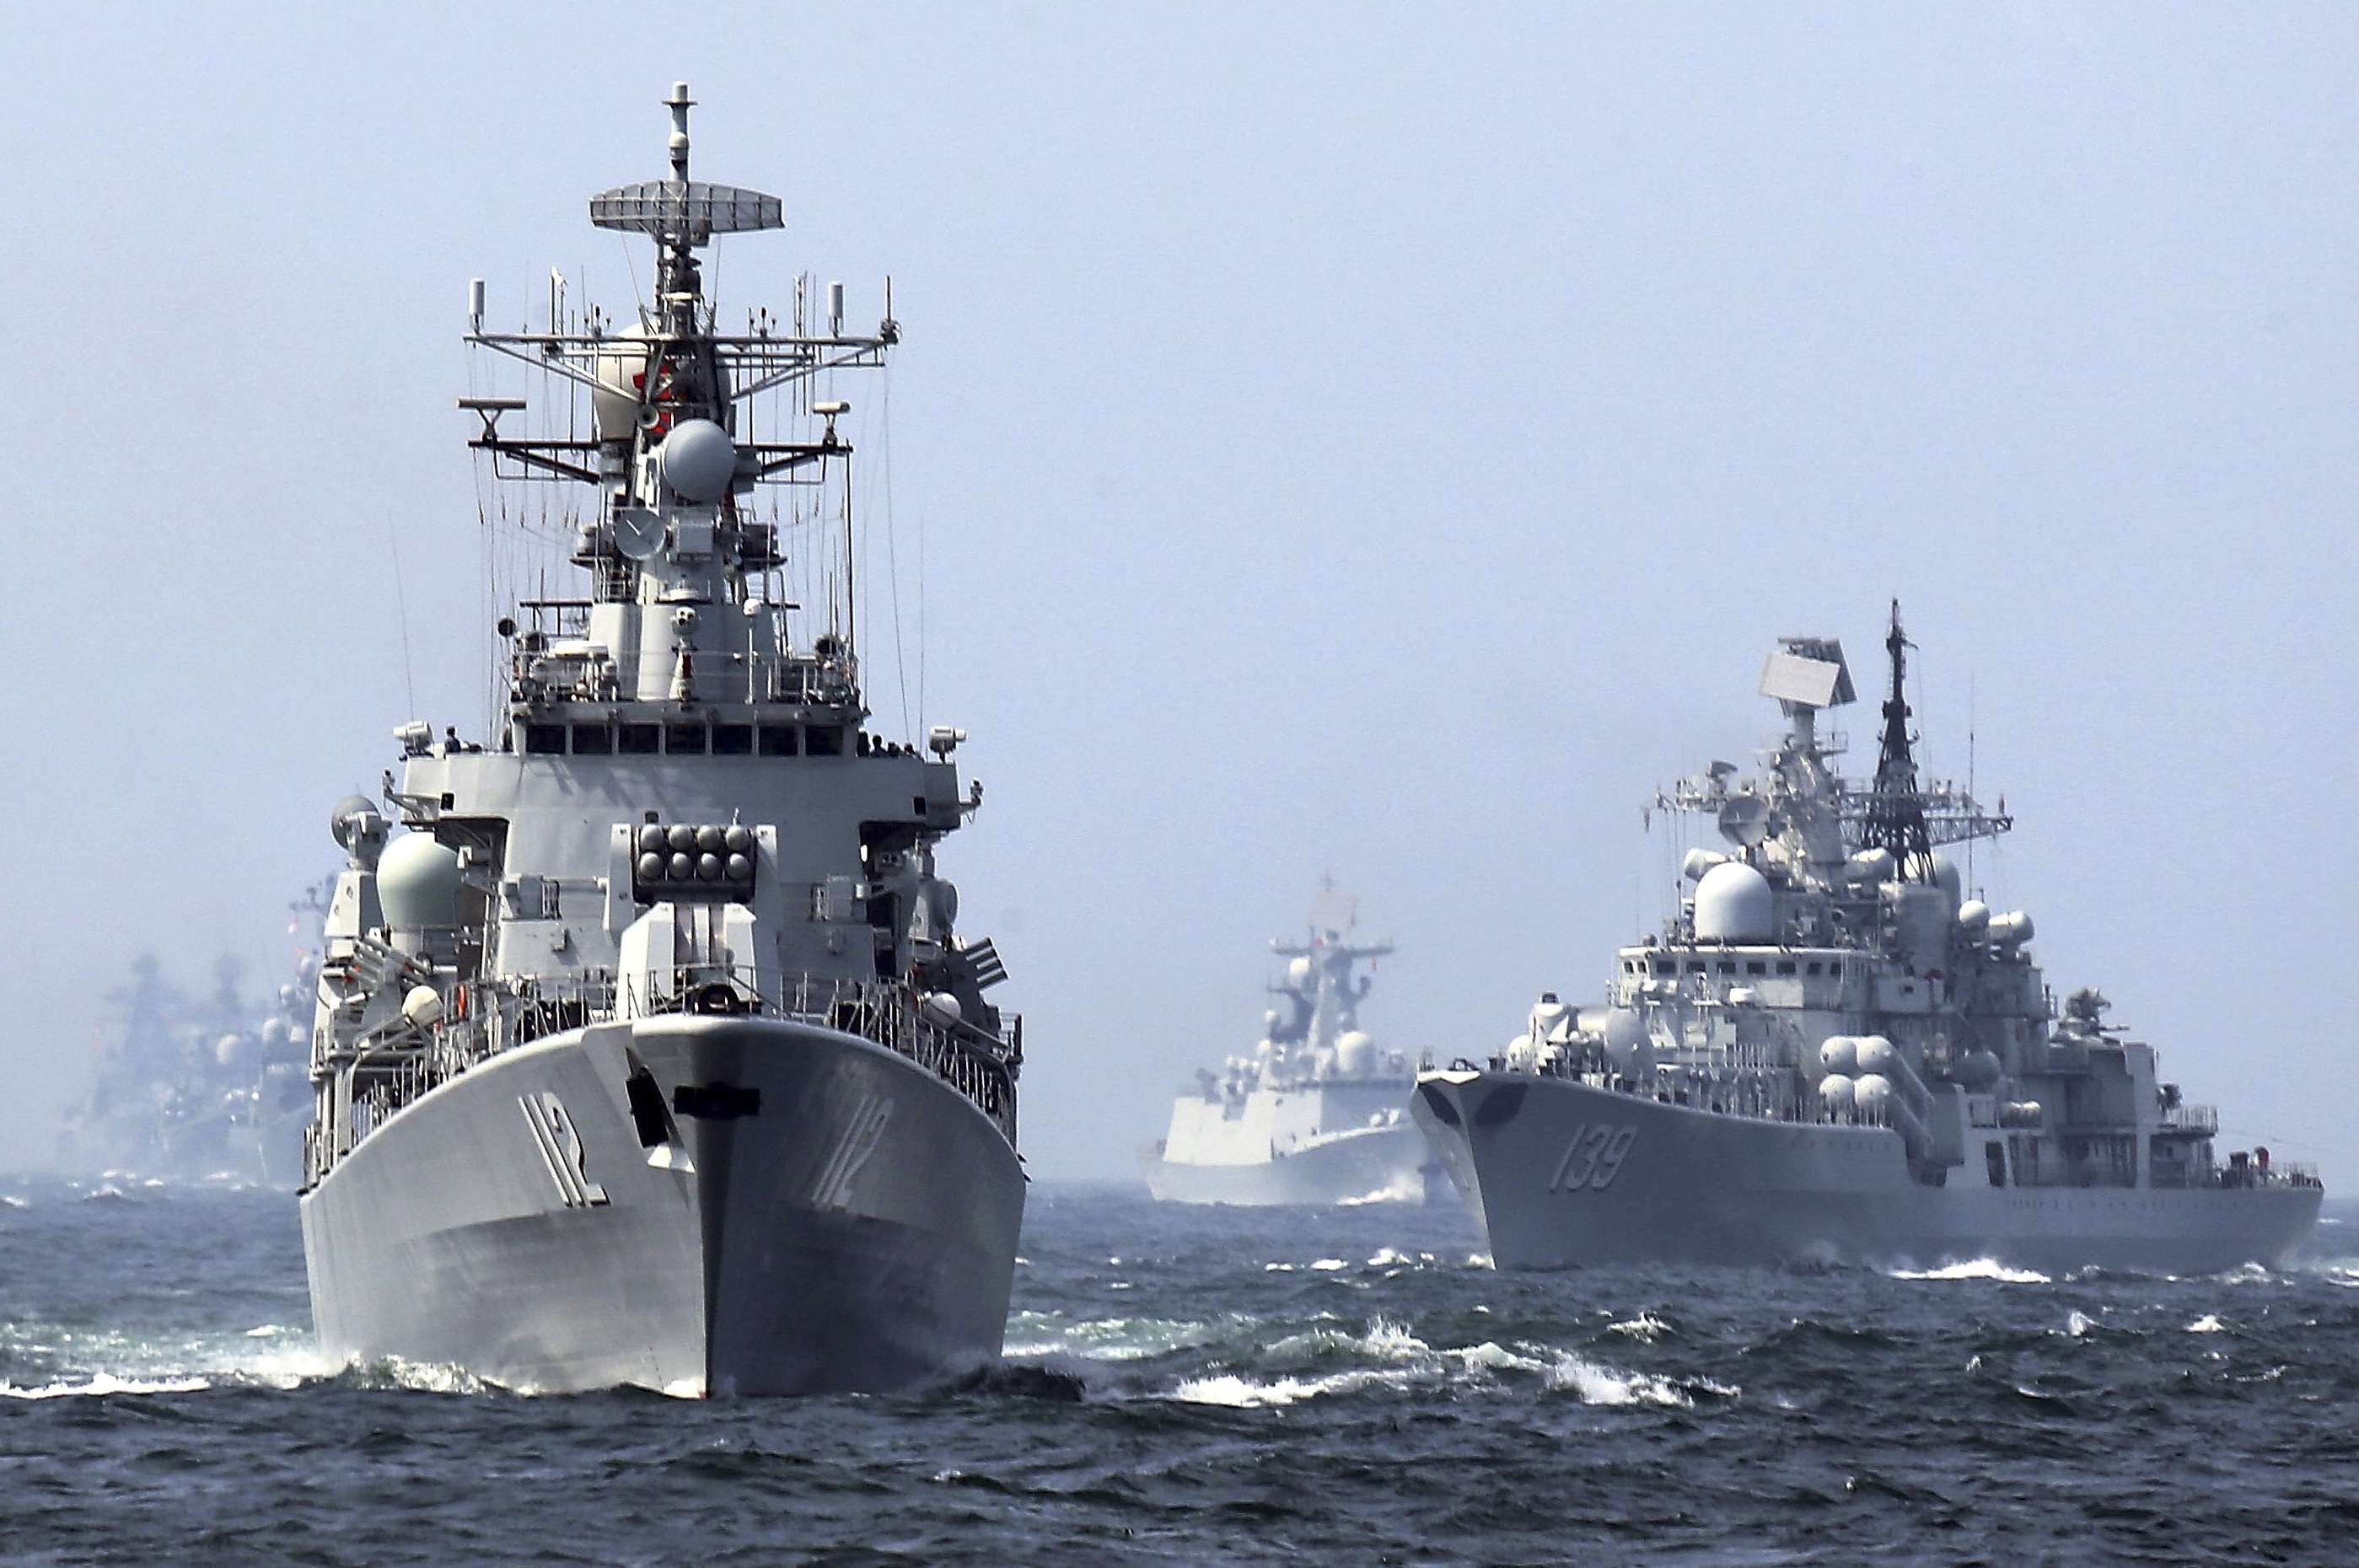 In this May 24, 2014, file photo, China's Harbin (112) guided missile destroyer and DDG-139 Ningbo Sovremenny class Type-956EM destroyer, right, take part in a week-long China-Russia "Joint Sea-2014" navy exercise at the East China Sea off Shanghai, China. A Chinese navy task force wrapped up visits to four Persian Gulf states as the increasingly capable maritime force grows its presence in the strategically vital region. The three ships, including Harbin, departed Kuwait on Sunday, Feb. 5, 2017, after stopping in Saudi Arabia, Qatar and the United Arab Emirates, the Defense Ministry said on its website Monday, Feb. 6, 2017. (Chinatopix via AP)